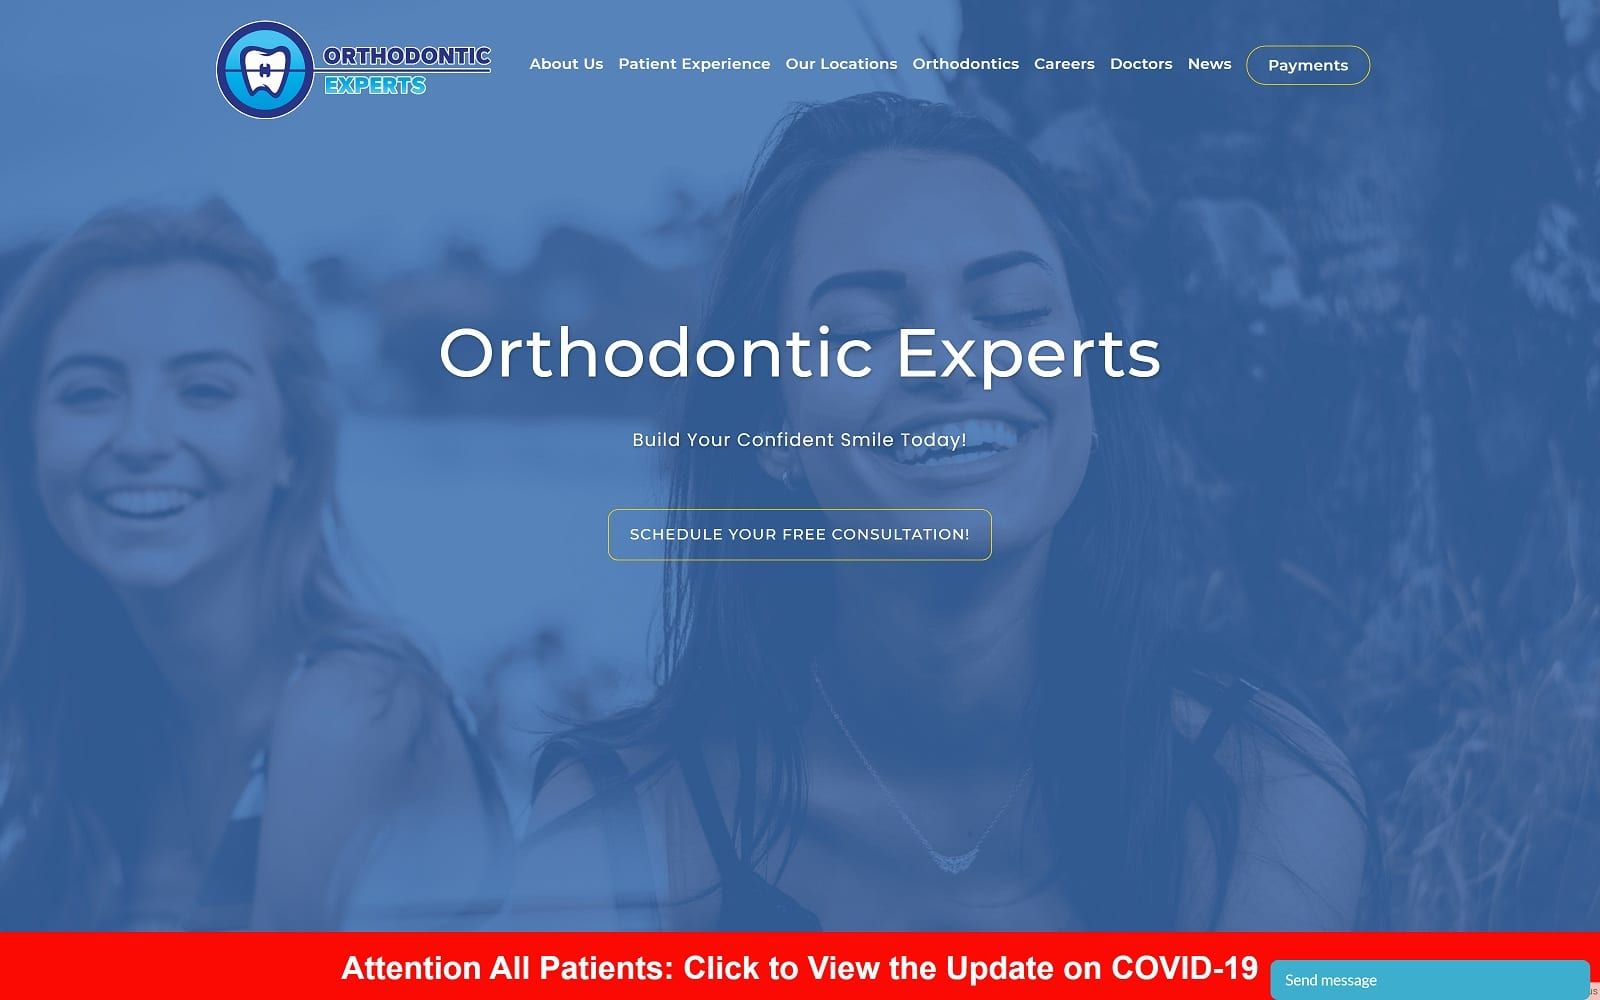 The screenshot of orthodontic experts orthodonticexprts. Com website